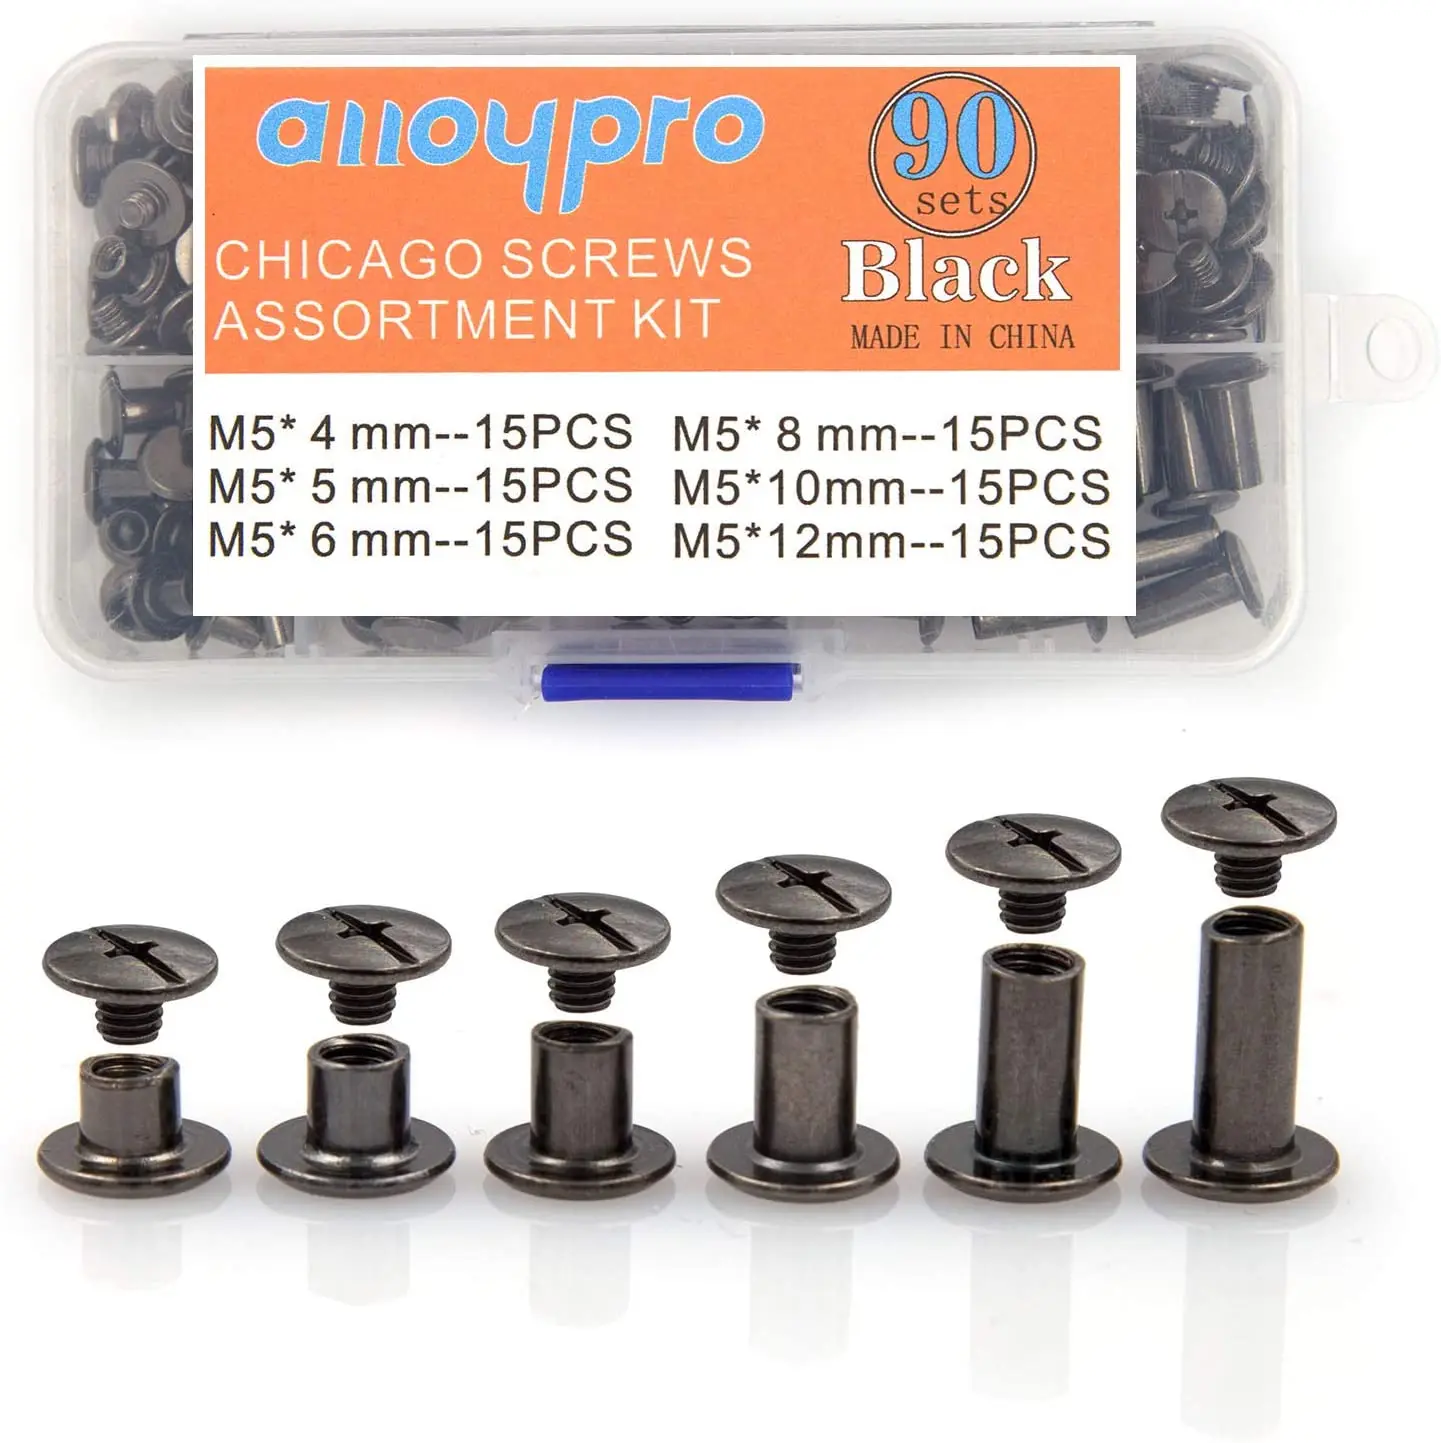 90Sets Chicago Screws Kit, 6 Sizes of Round Flat Head Leather Rivets Metal Screw Studs for DIY Leather Craft and Bookbinding